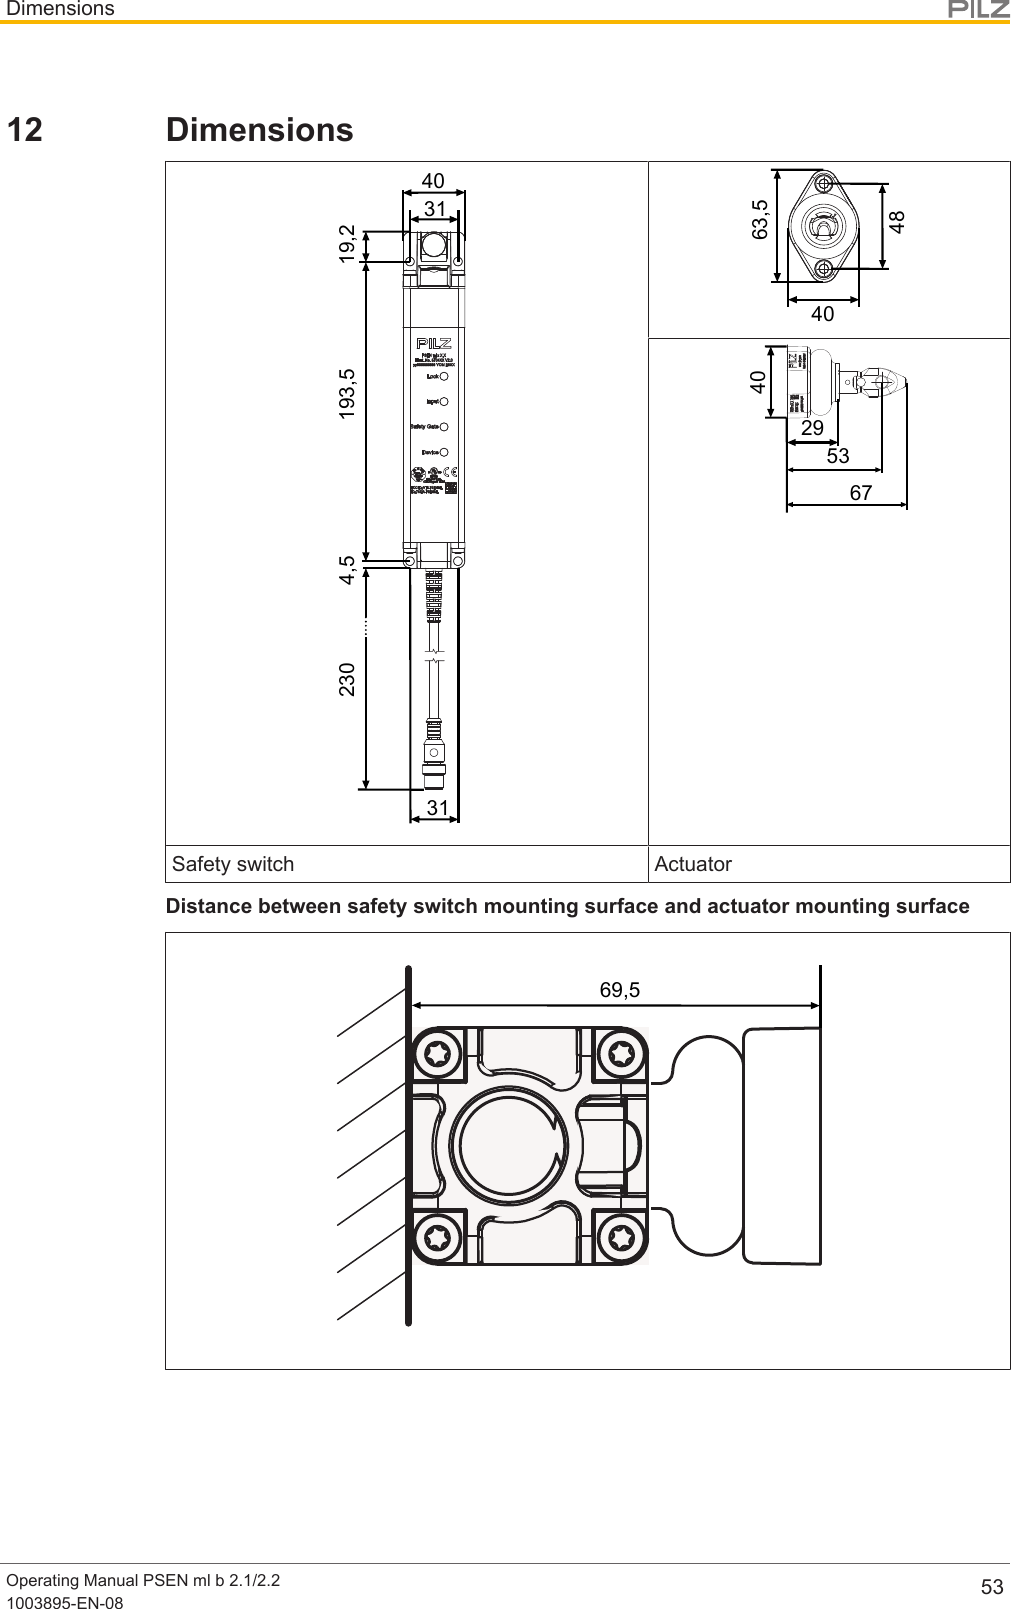 DimensionsOperating Manual PSEN ml b 2.1/2.21003895-EN-08 5312 Dimensions3119,2193,54,54031230484063,529536740Safety switch ActuatorDistance between safety switch mounting surface and actuator mounting surface69,5